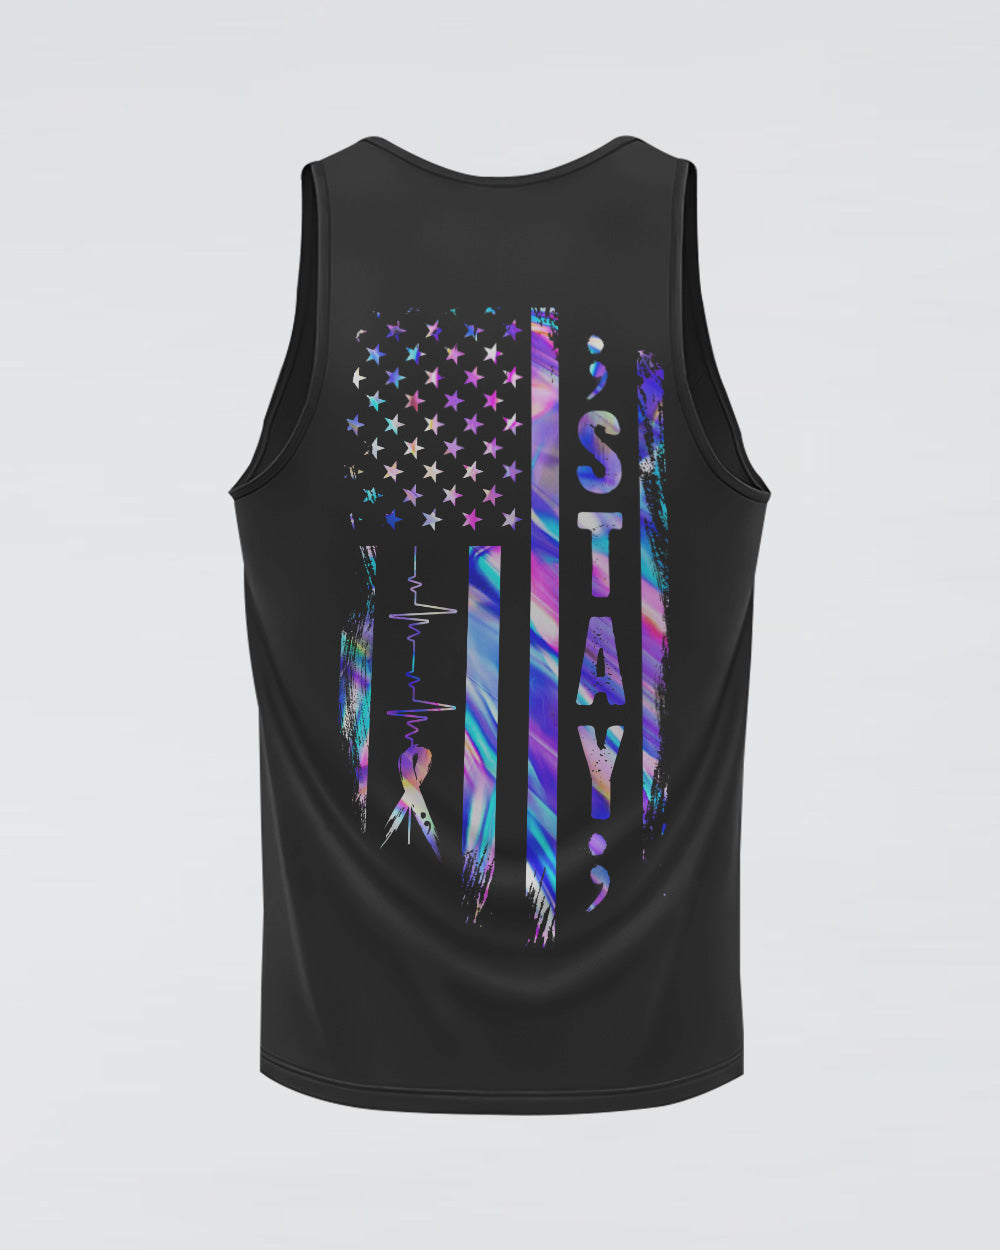 Stay Flag Women's Suicide Prevention Awareness Tanks